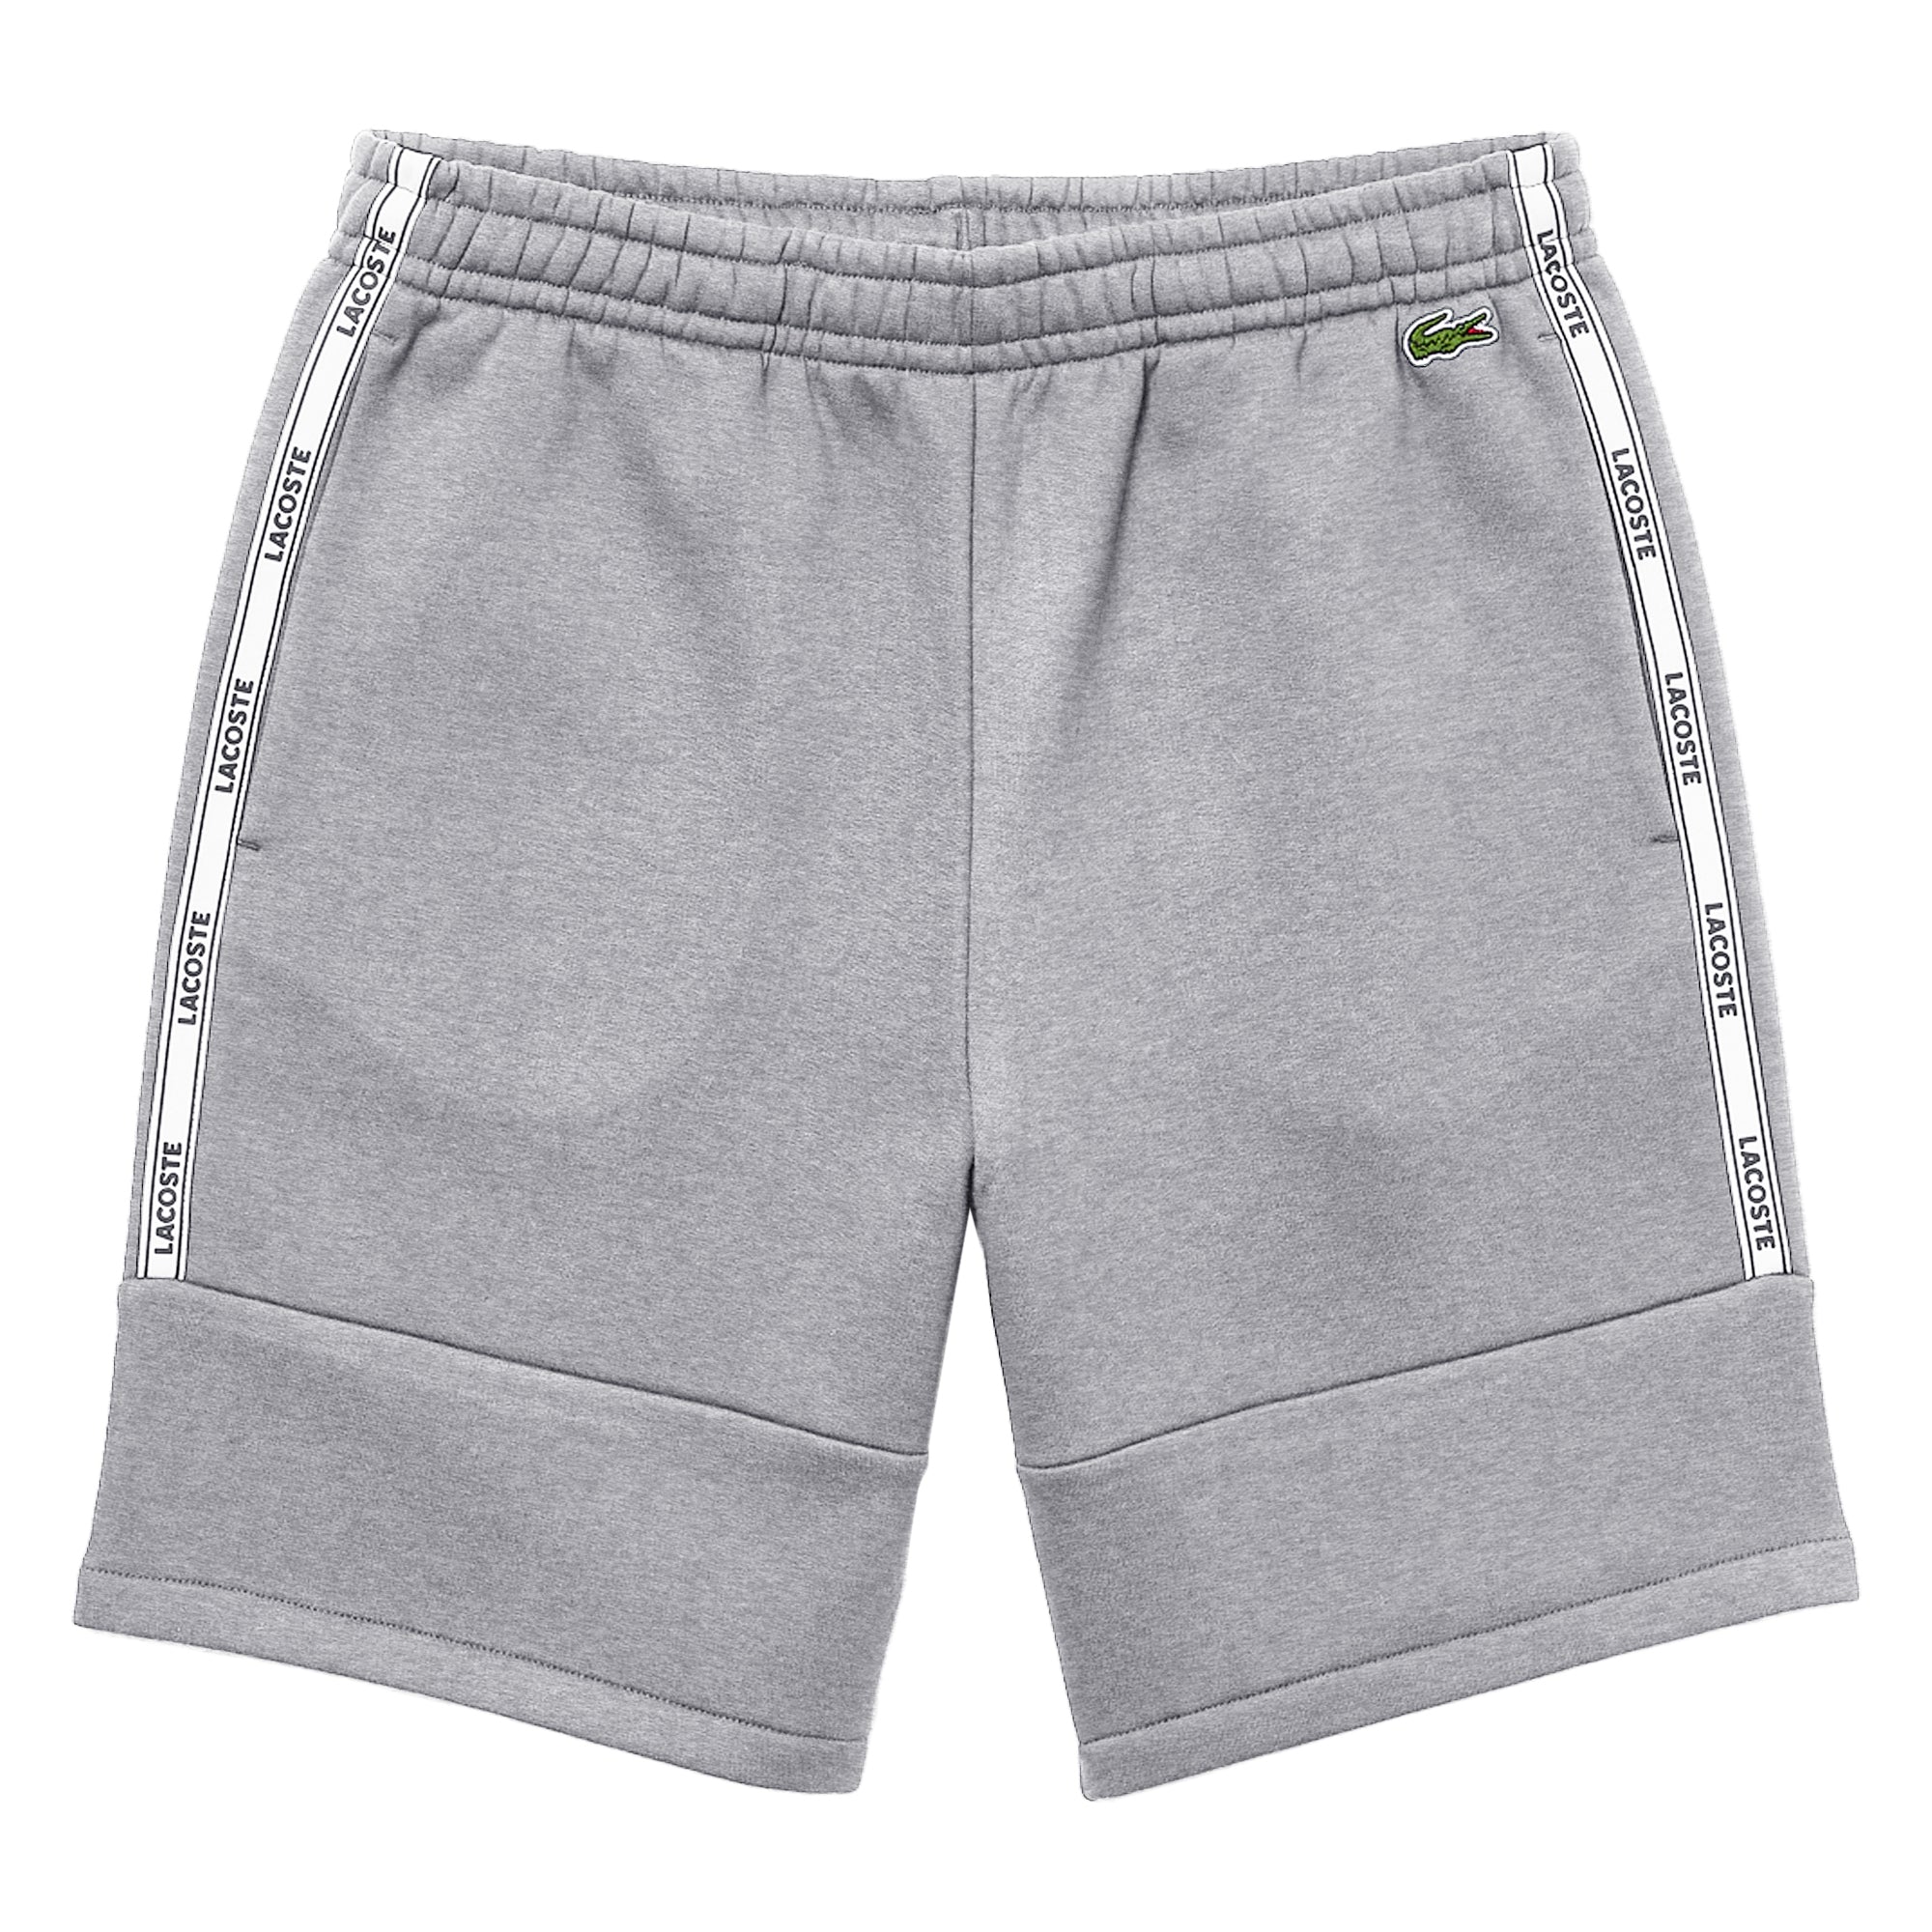 Lacoste Tape Jog Shorts GH1201 - Silver